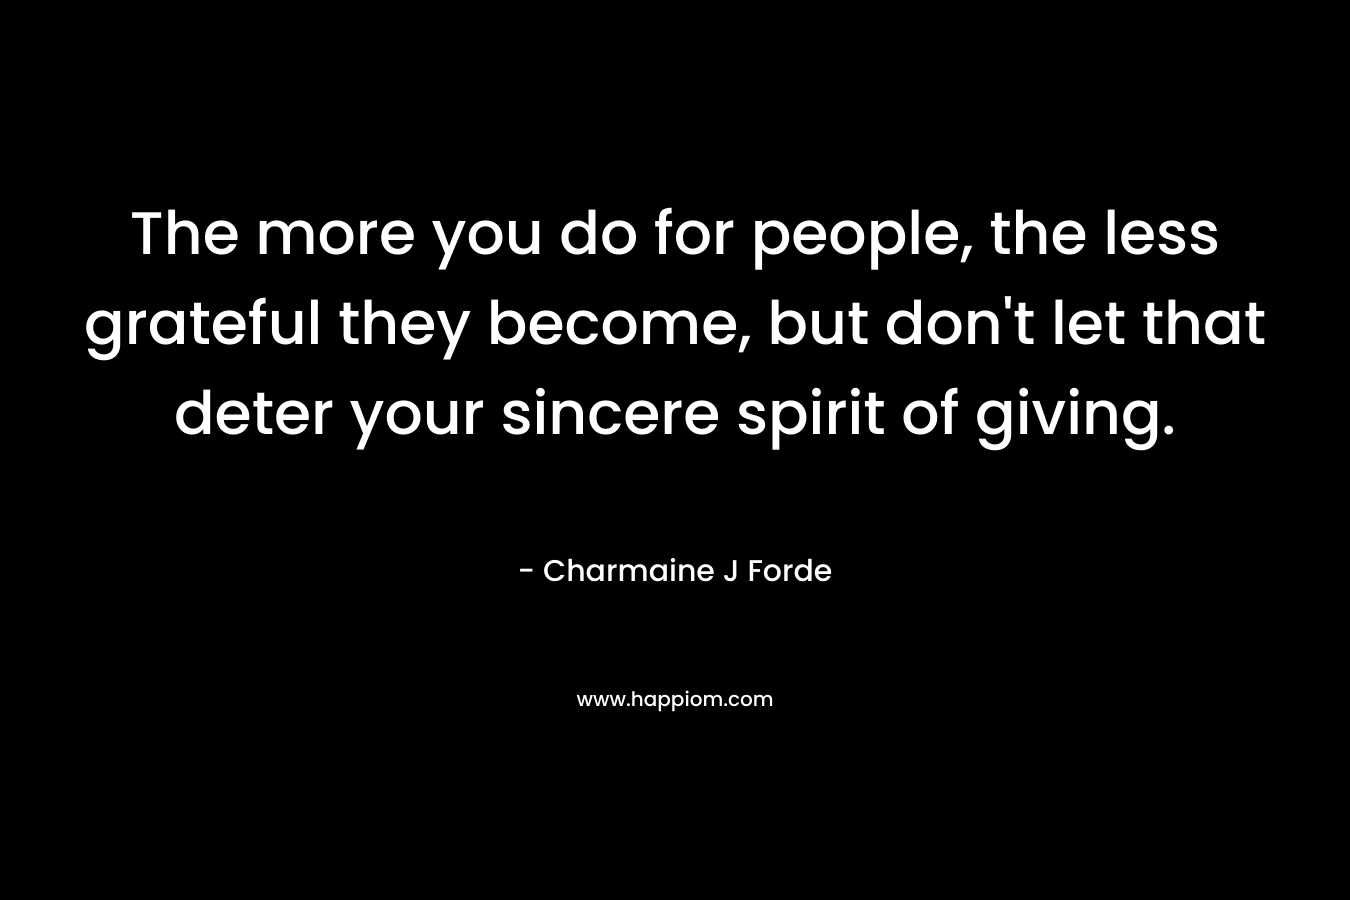 The more you do for people, the less grateful they become, but don't let that deter your sincere spirit of giving.